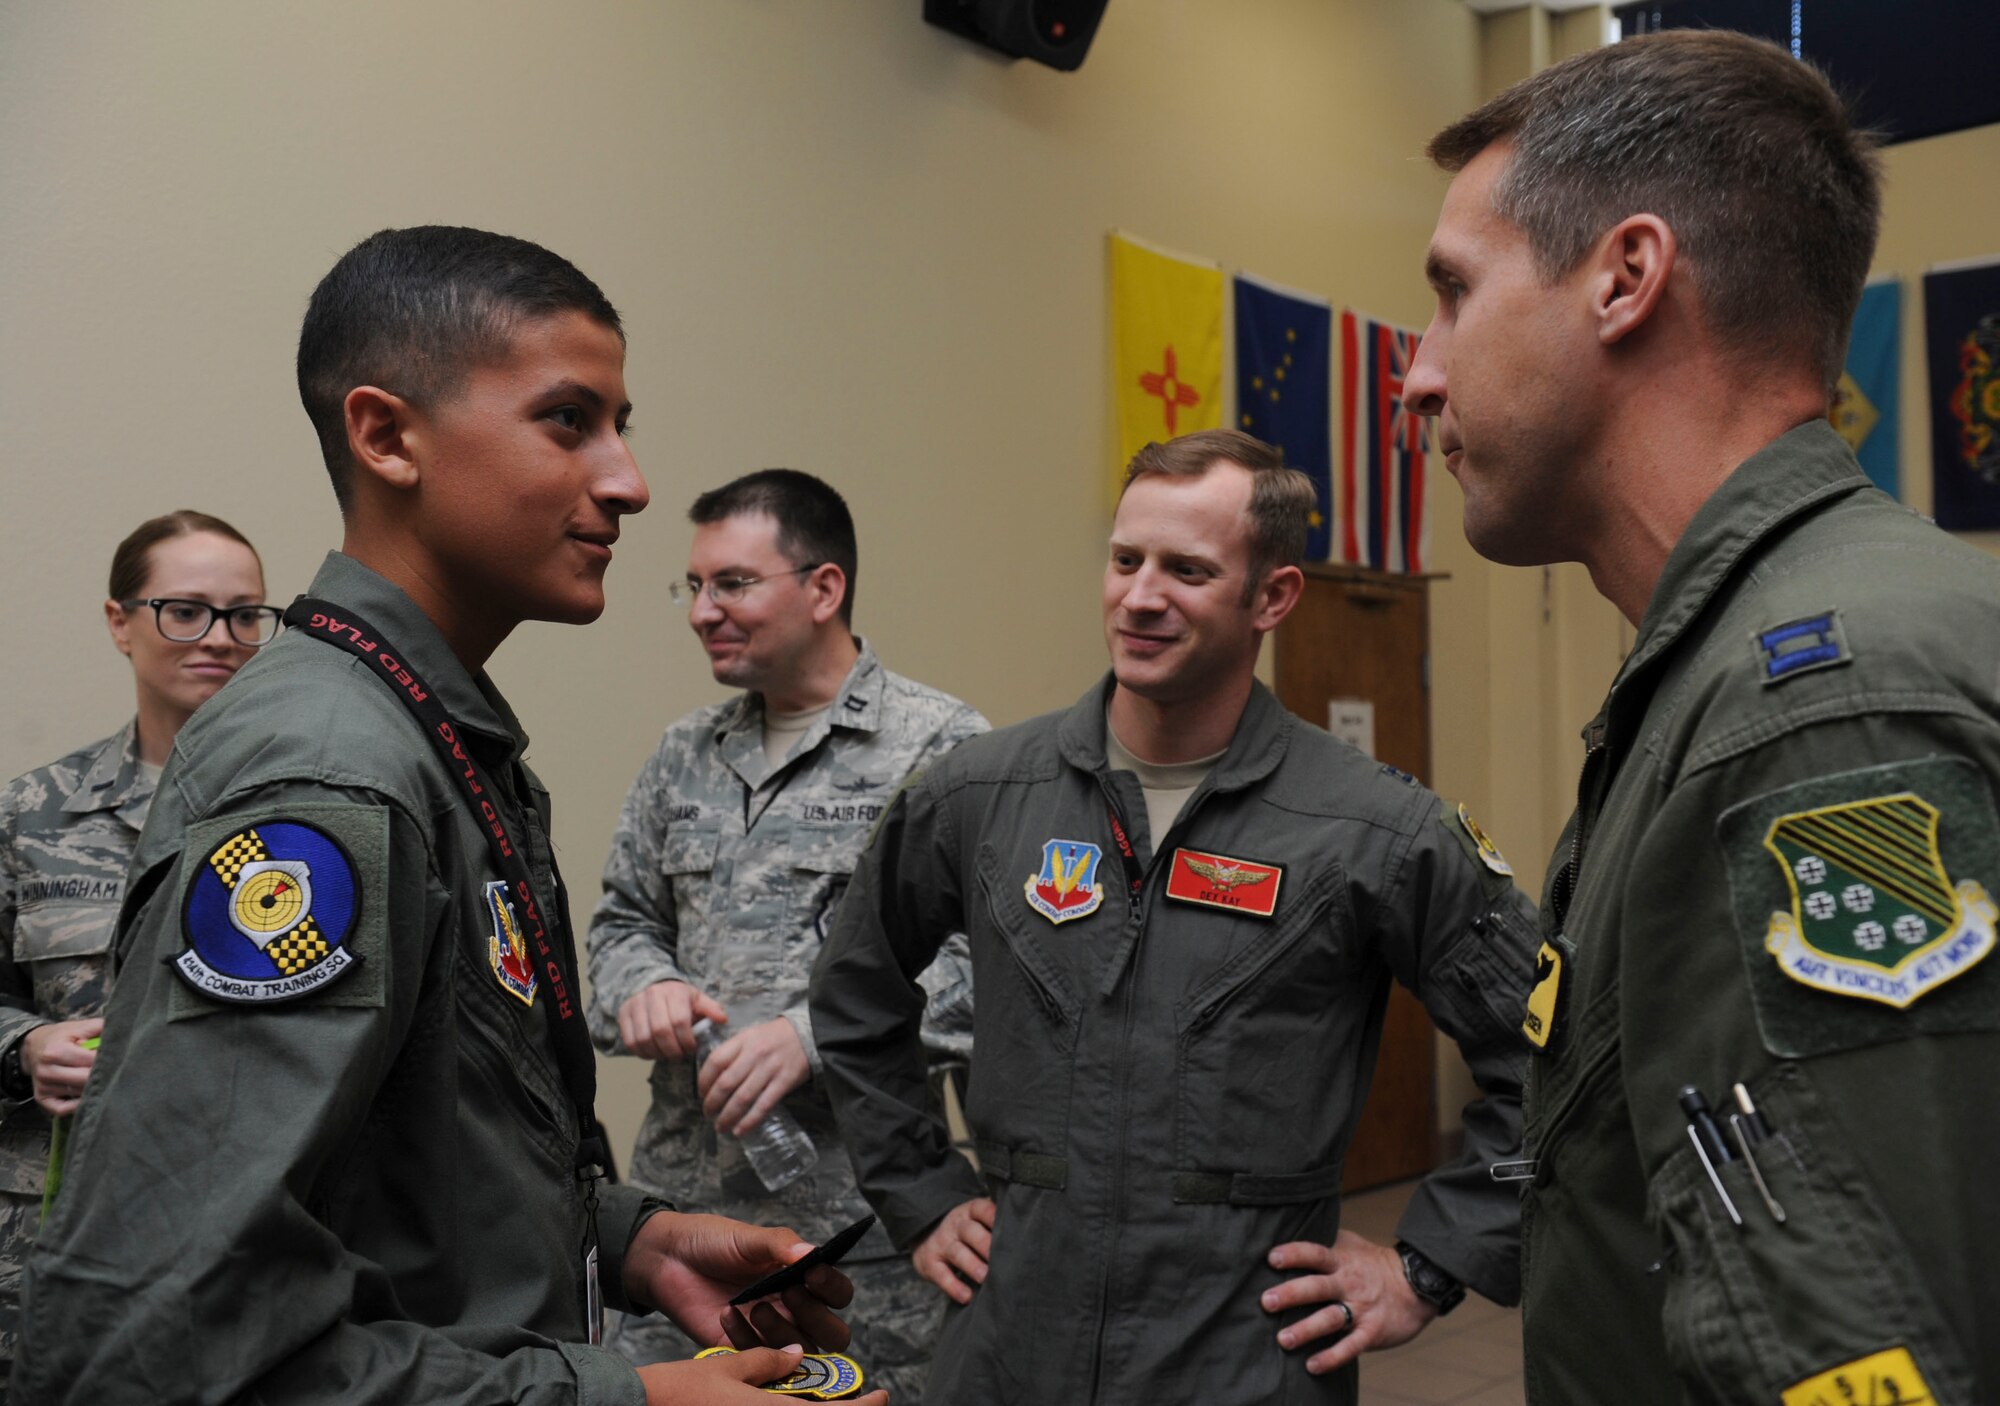 Reymond meets with Red Flag key players during his visit to Nellis Air Force Base, Nev., on July 19, 2016. Capt. Robert Hansen, 27th Fighter Squadron F-22 aircraft commander at Langley AFB, Virginia shares encouraging words regarding his cancer survival story. (U.S. Air Force photo by Staff Sgt. Darlene Seltmann)